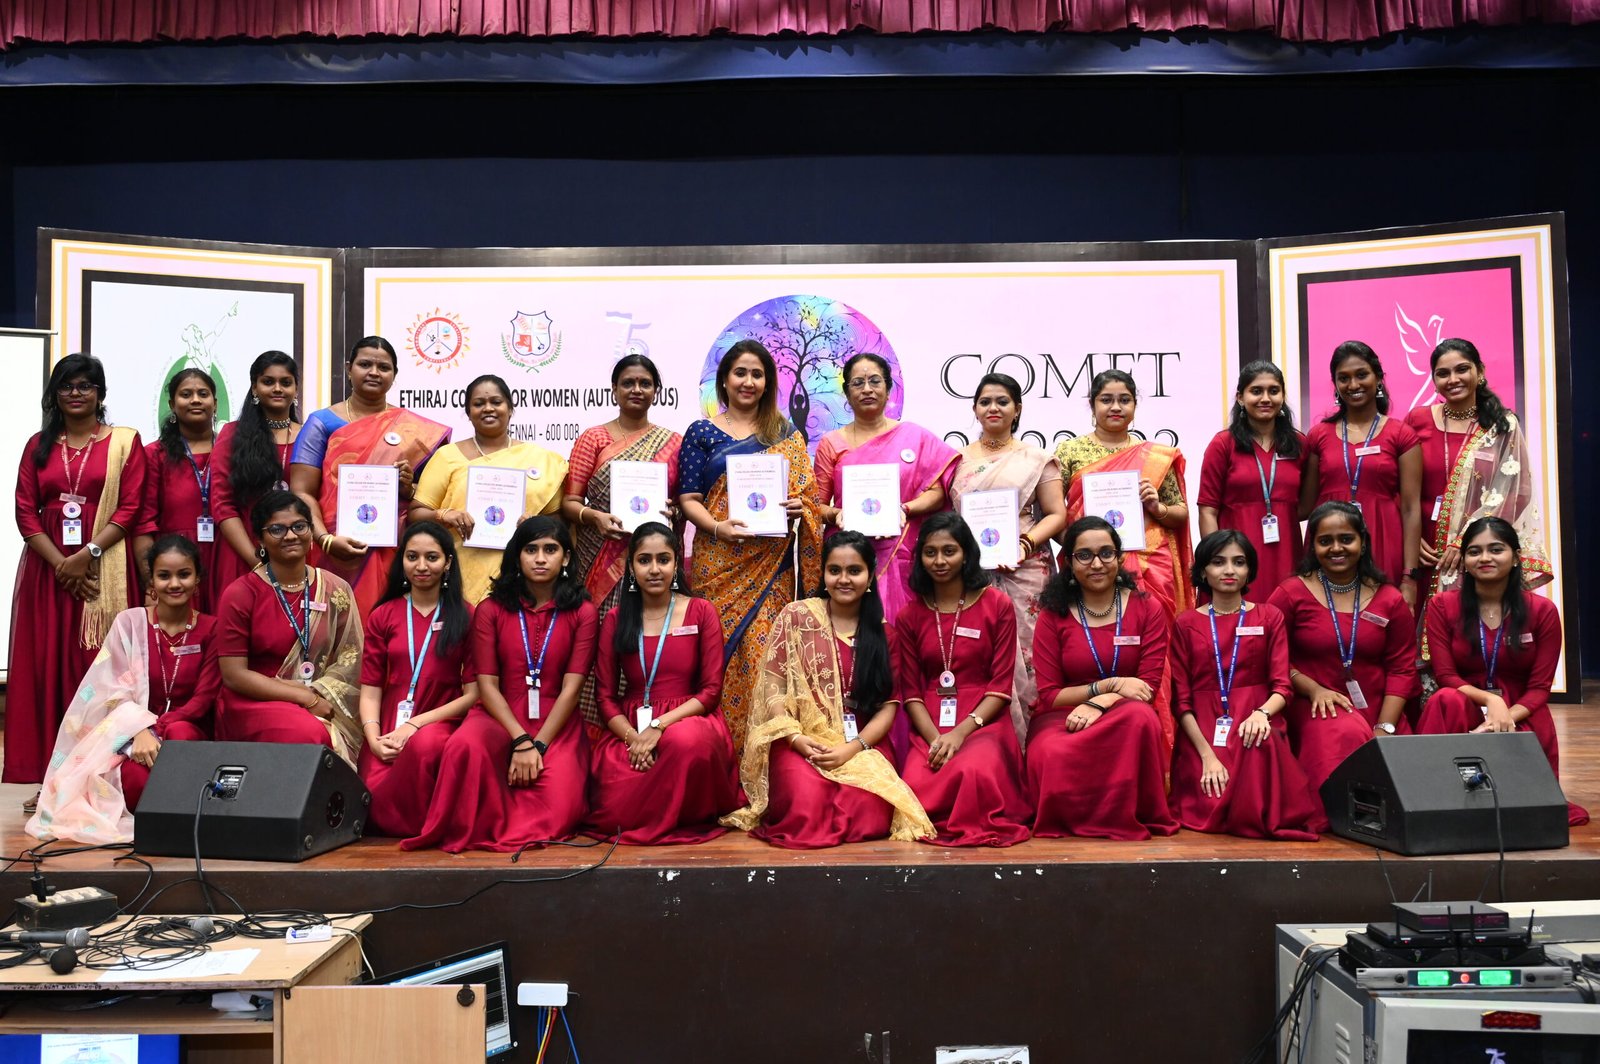 About Department of Commerce at Ethiraj College for Women